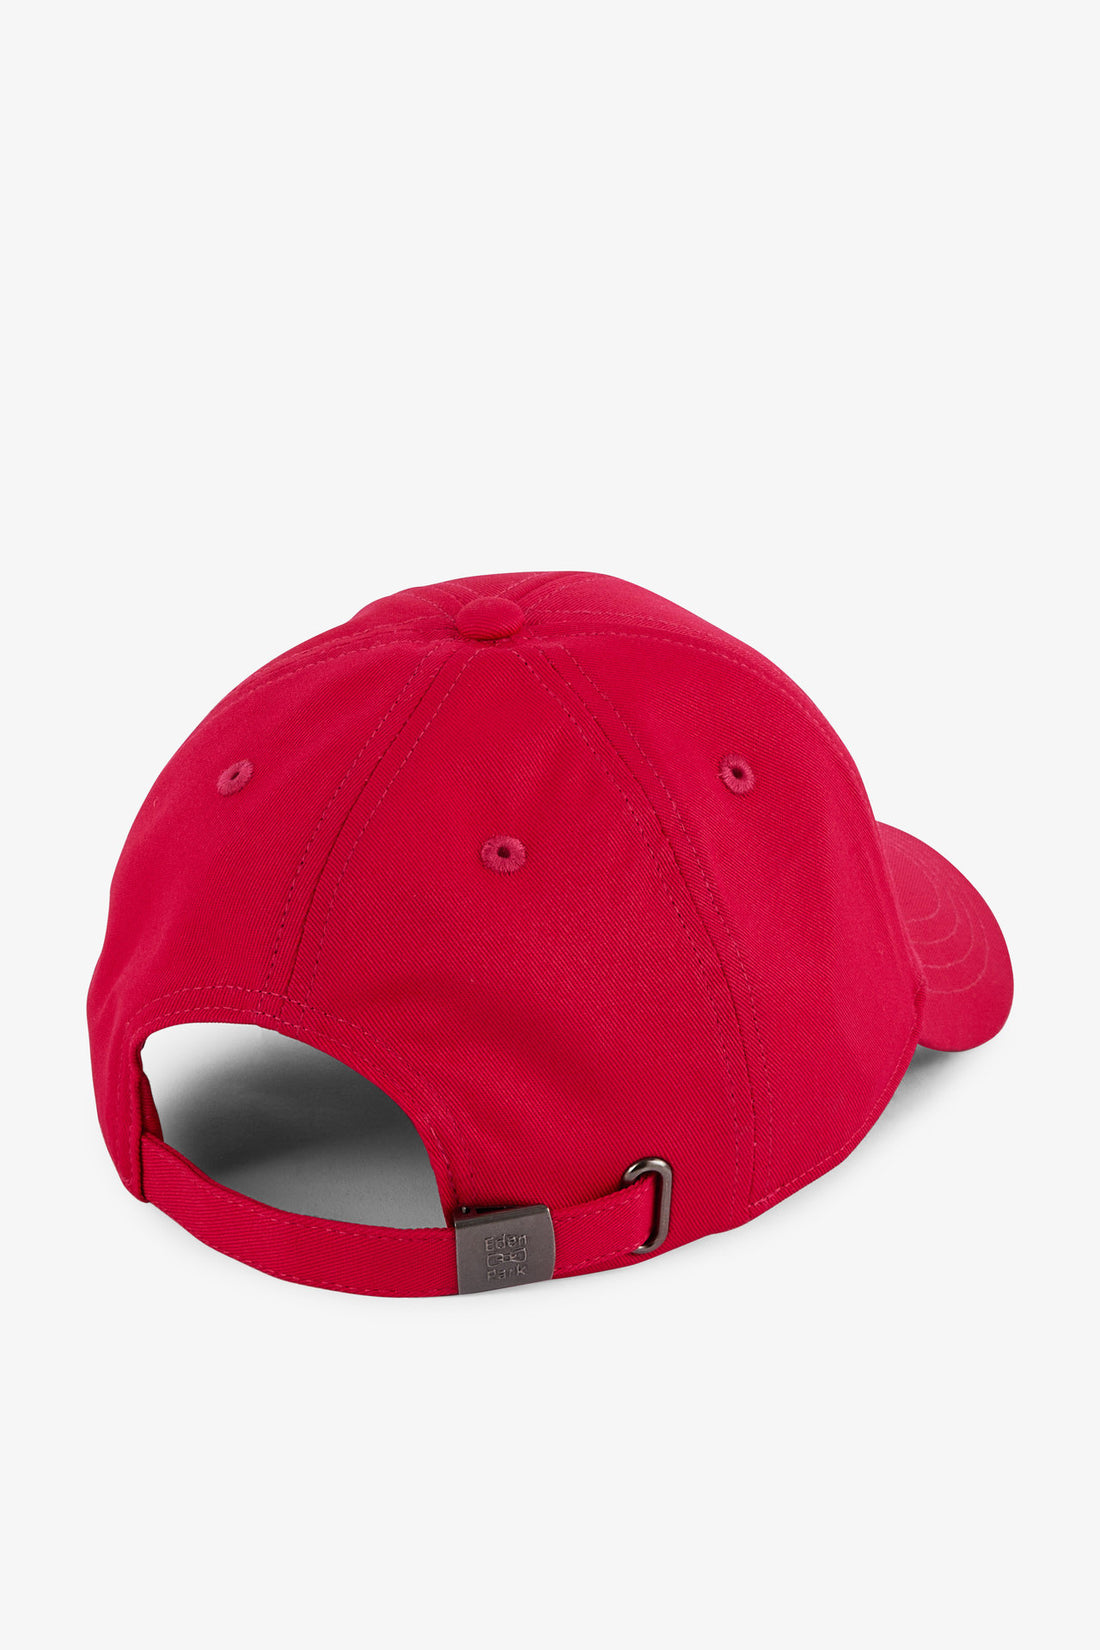 Red Cotton Canvas Cap With Bow Tie Embroidery_E24CHACA0001_RGM10_02